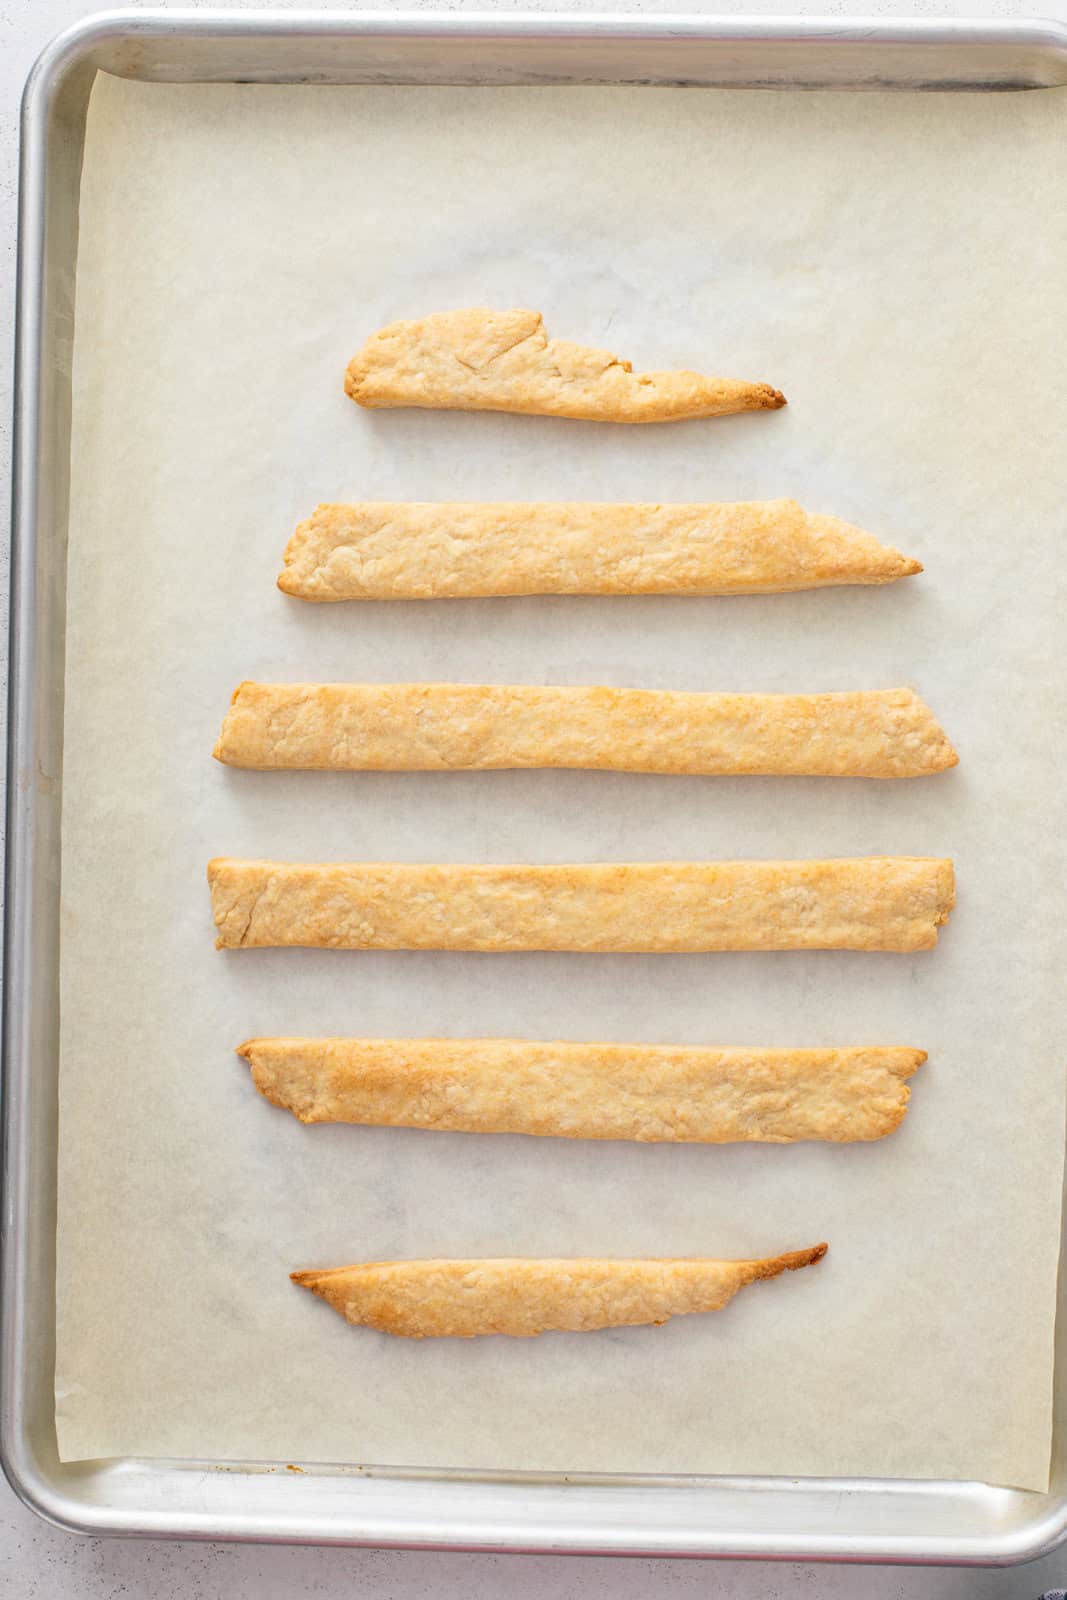 Baked strips of pastry dough on a baking sheet.